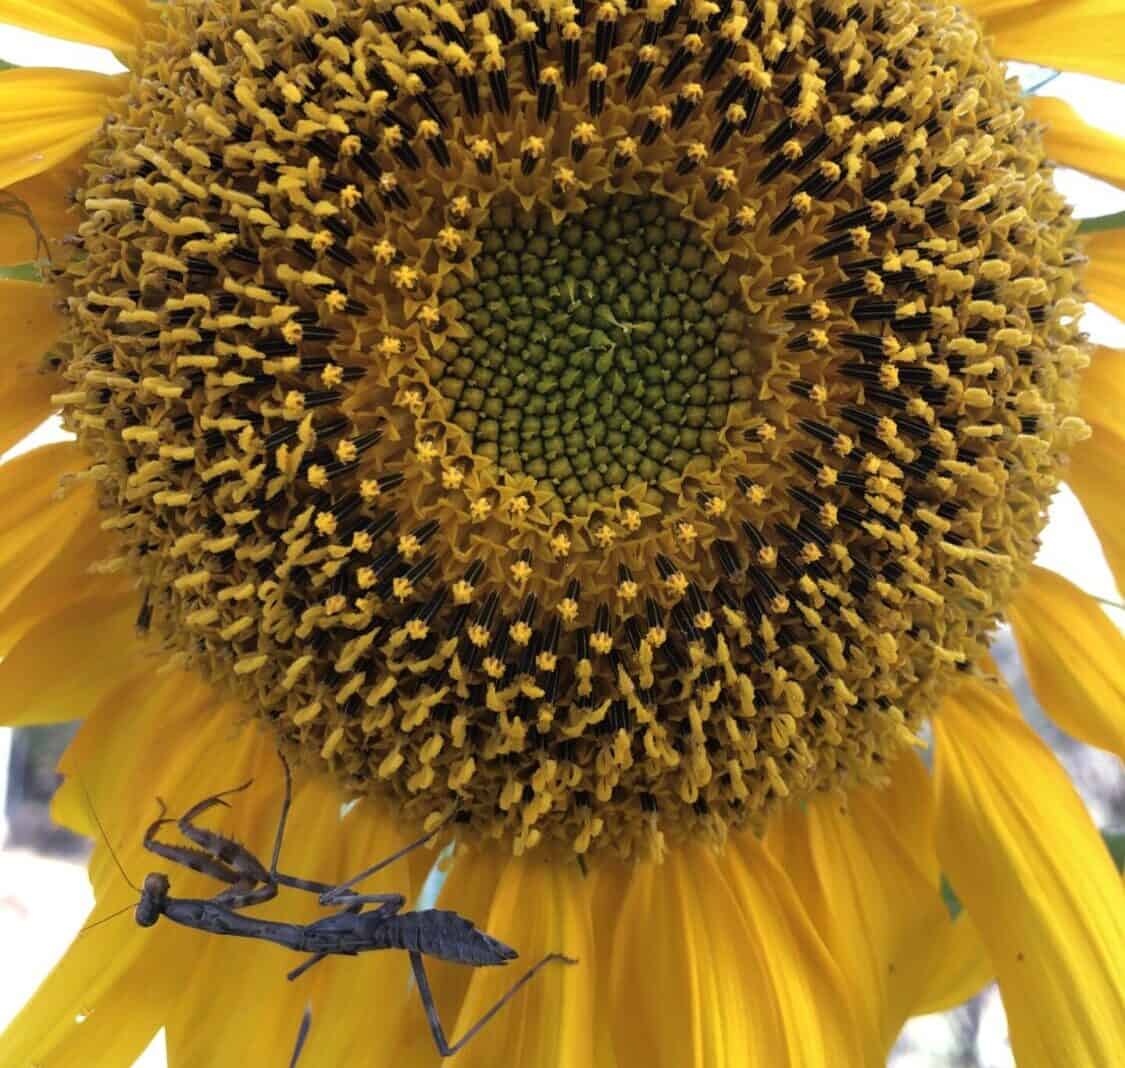 a dark praying mantis is waiting for its prey to appear on a blooming sunflower